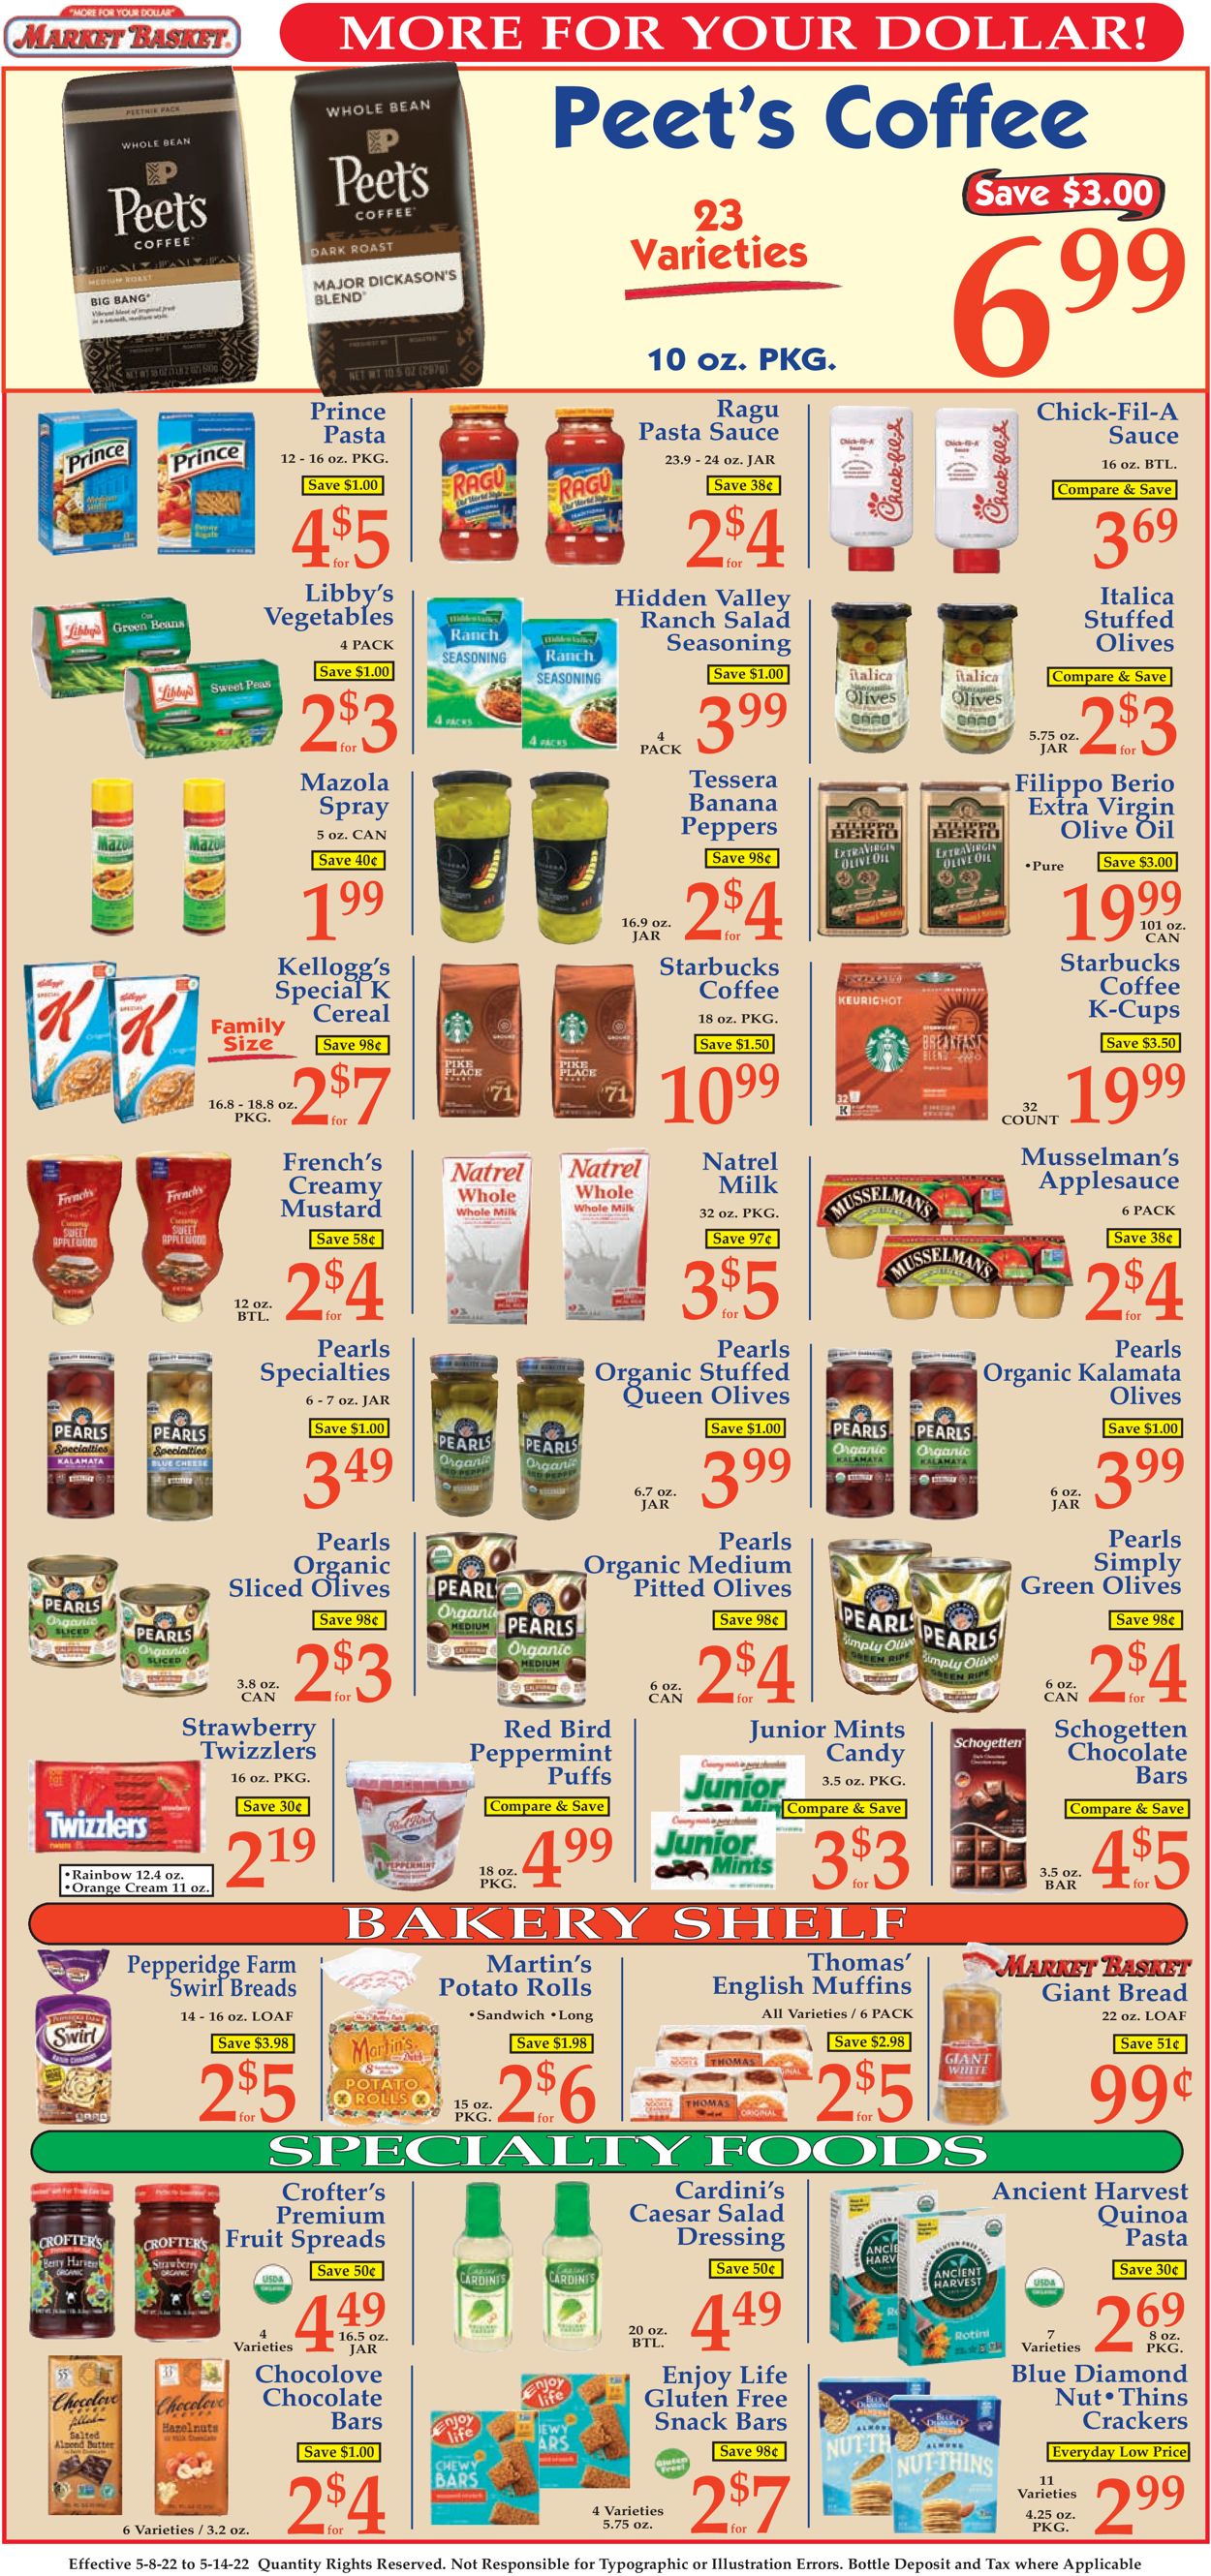 Market Basket Ad from 05/08/2022